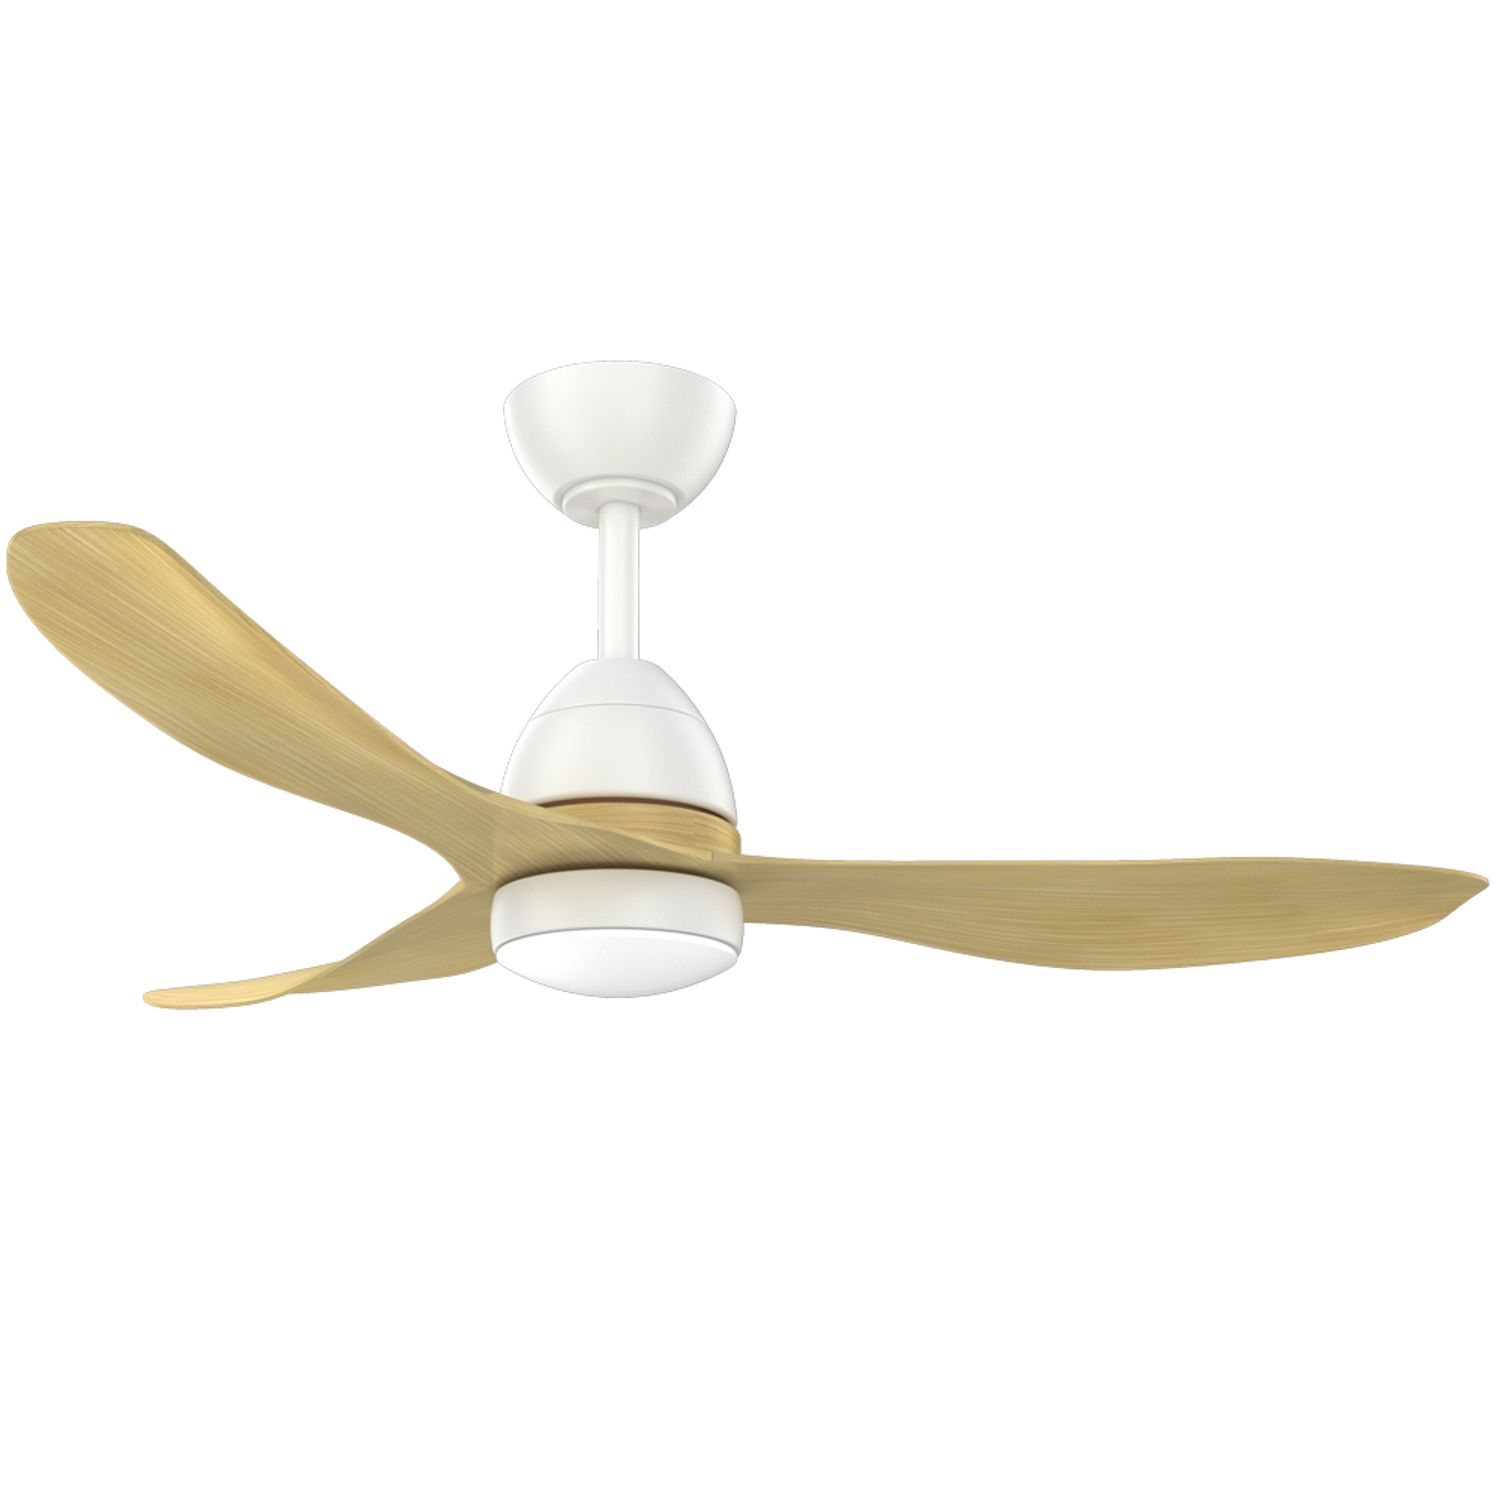 52" White and Real Wood Ceiling Fan with Reversible Motor and LED Light